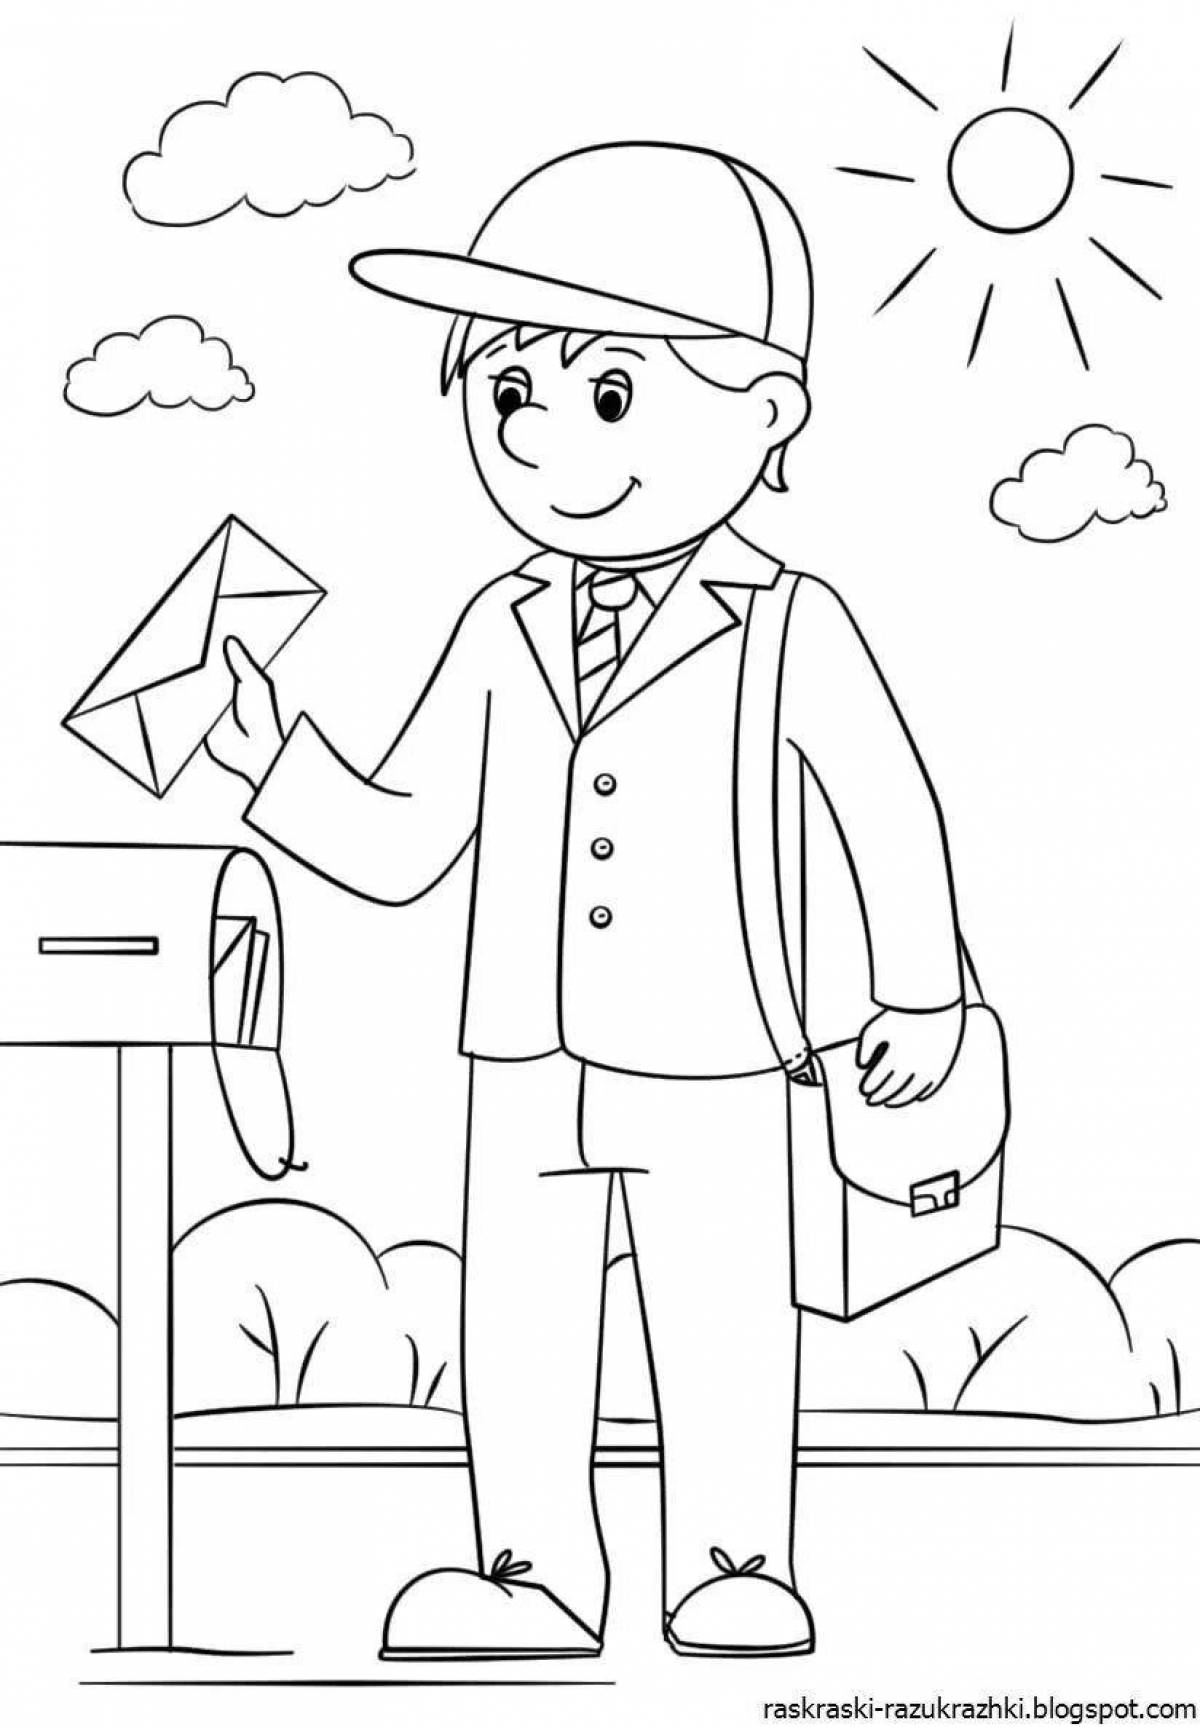 Fun job coloring pages for kids